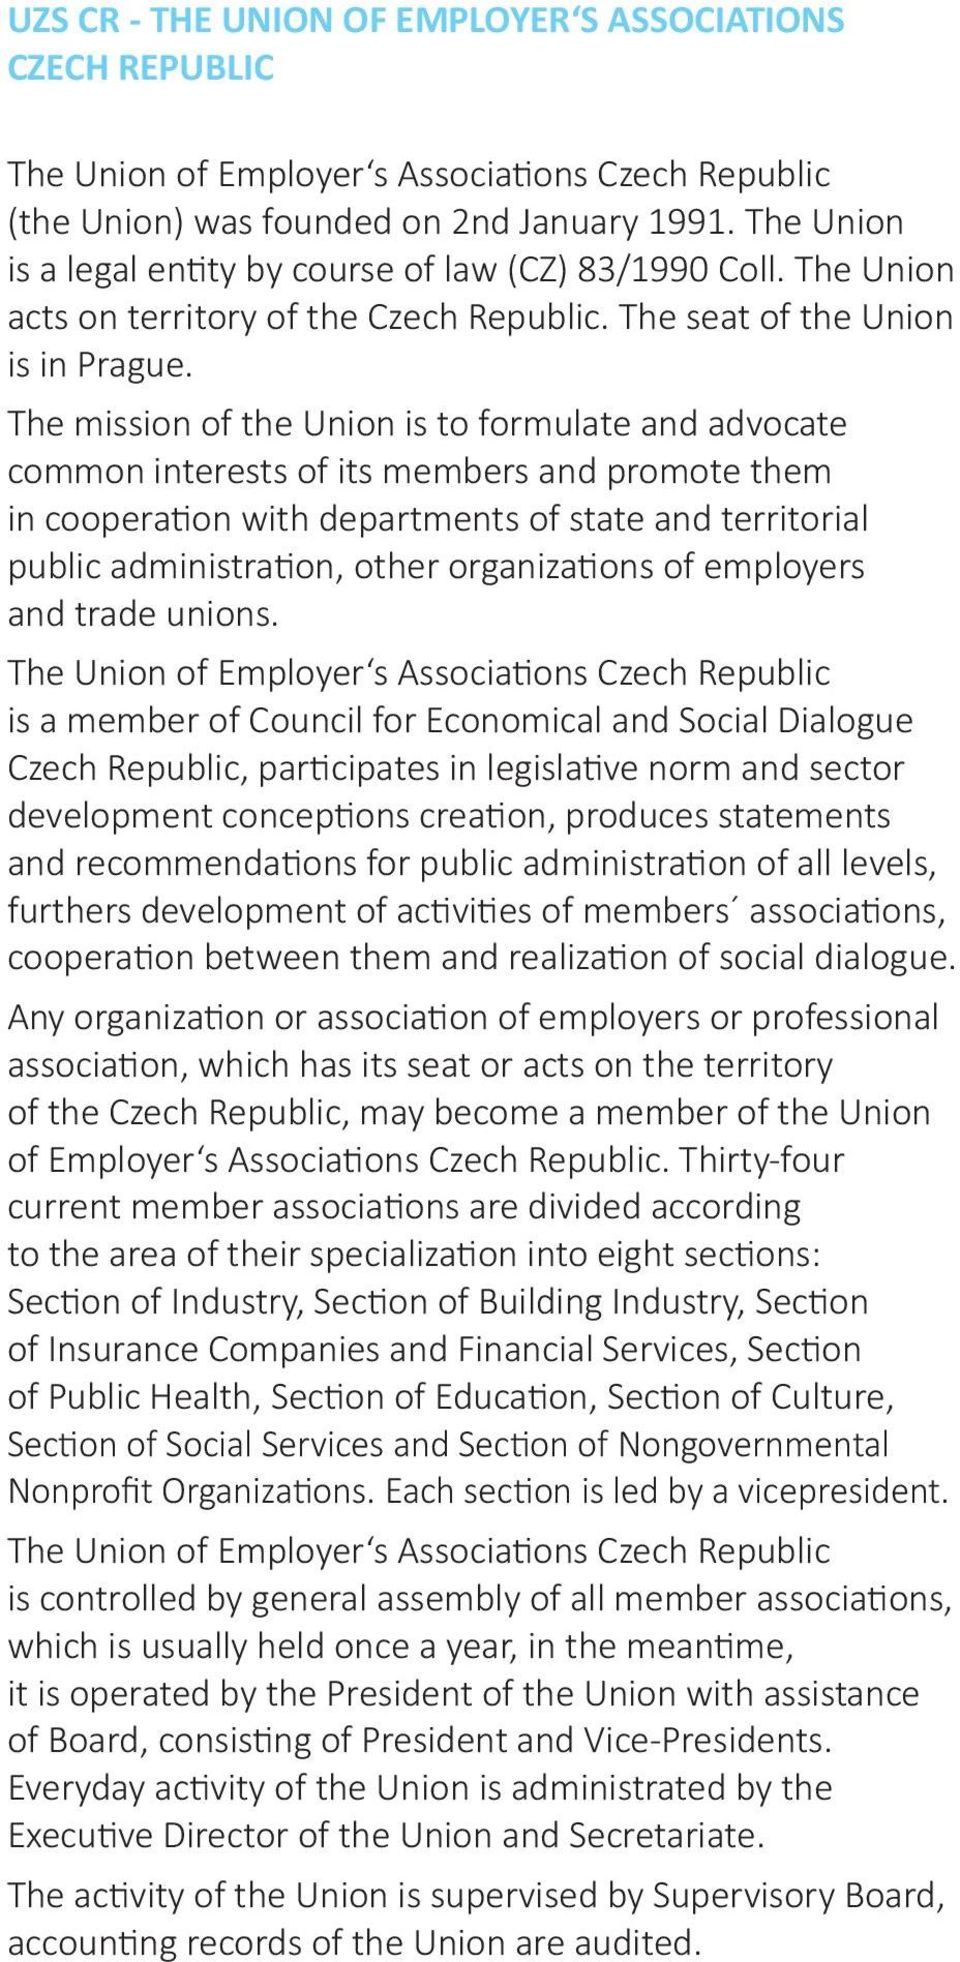 The mission of the Union is to formulate and advocate common interests of its members and promote them in cooperation with departments of state and territorial public administration, other